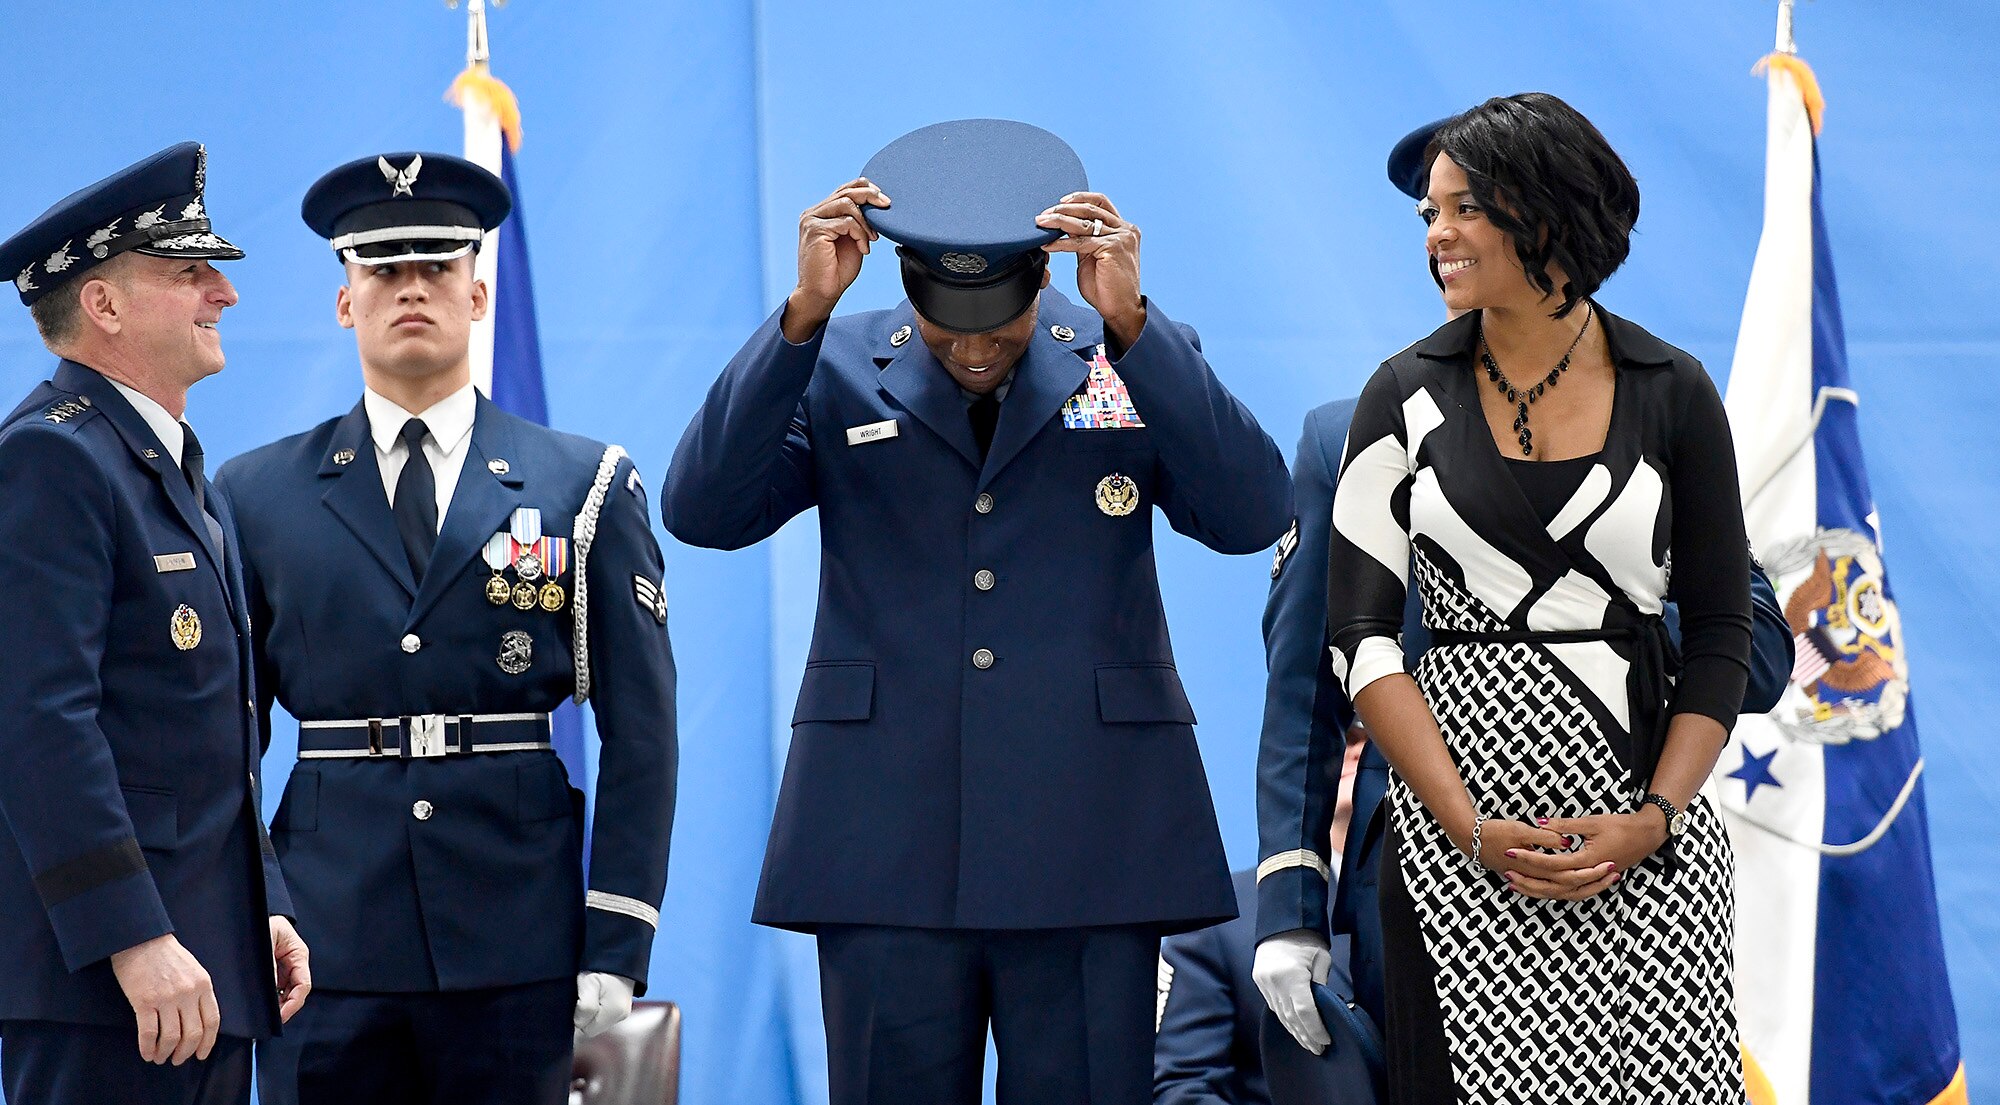 Chief Master Sgt. of the Air Force Kaleth O. Wright adjusts his new uniform hat for the first time during his appointment ceremony on Joint Base Andrews, Md., Feb. 17, 2017. Wright succeeds Chief Master Sgt. of the Air Force James A. Cody, who retires after 32 years of service, and he is the 18th Airman to hold this position. (U.S. Air Force photo/Scott M. Ash)